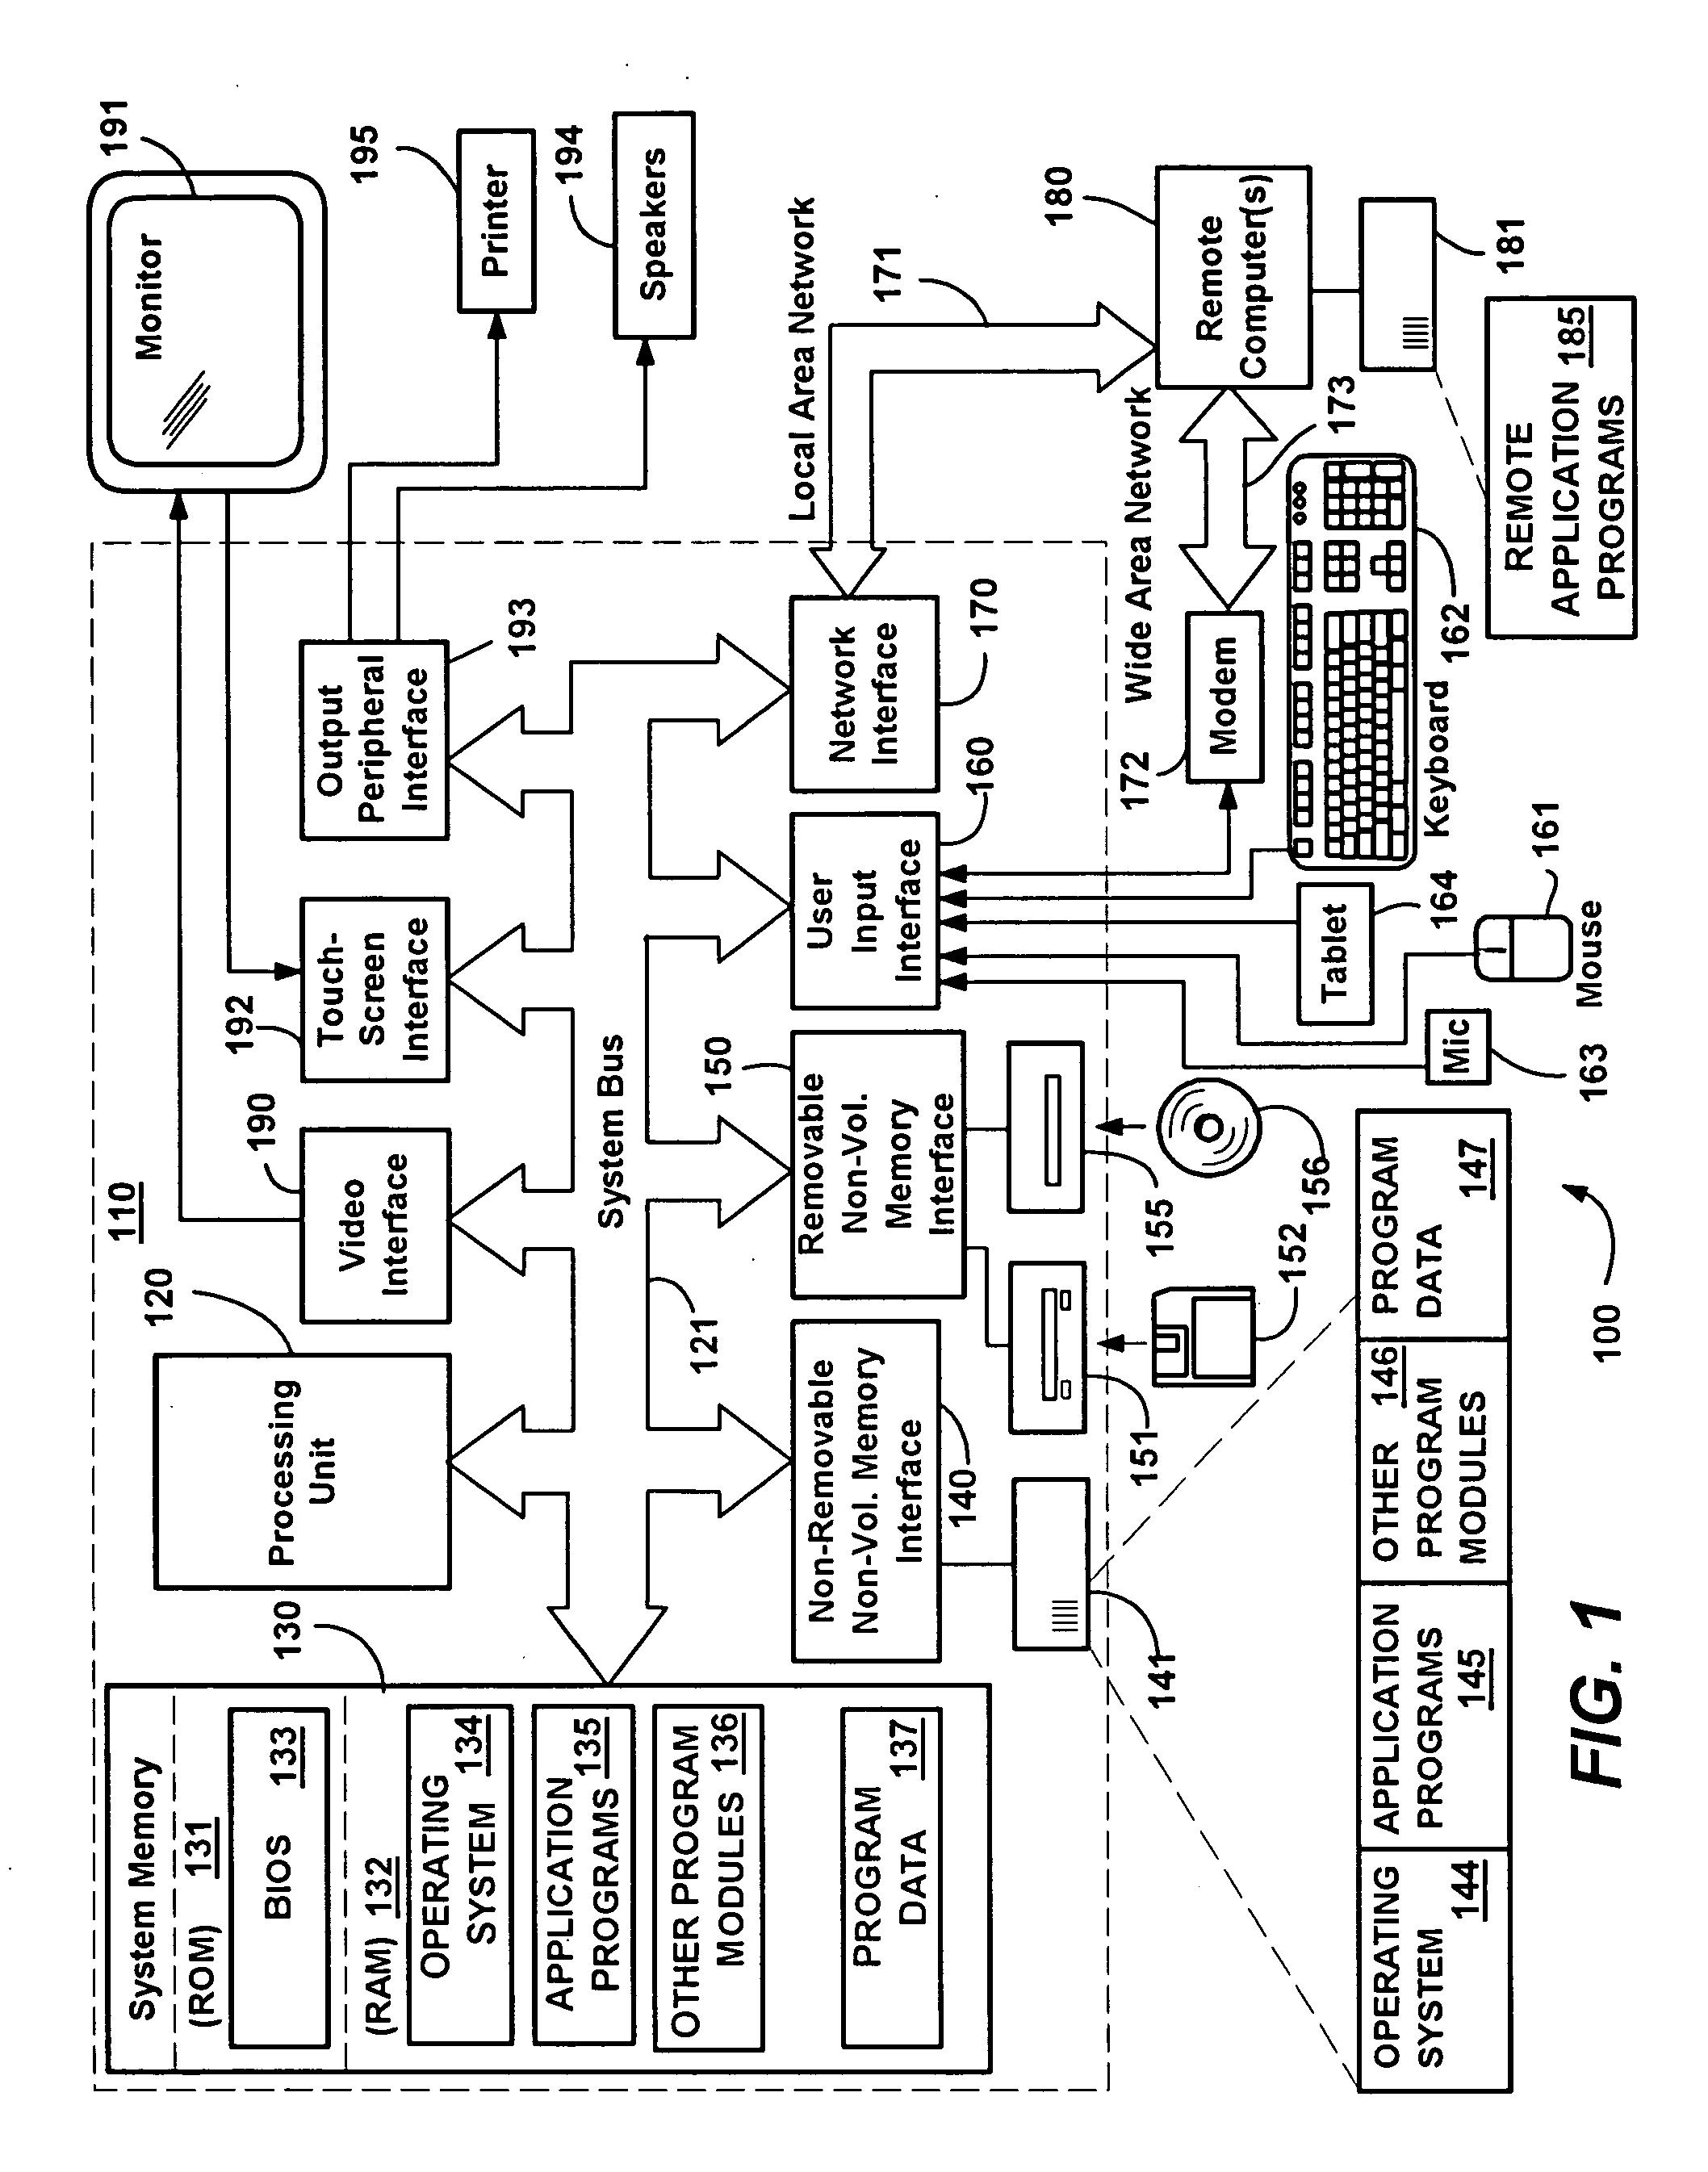 System and method for providing a health model for software